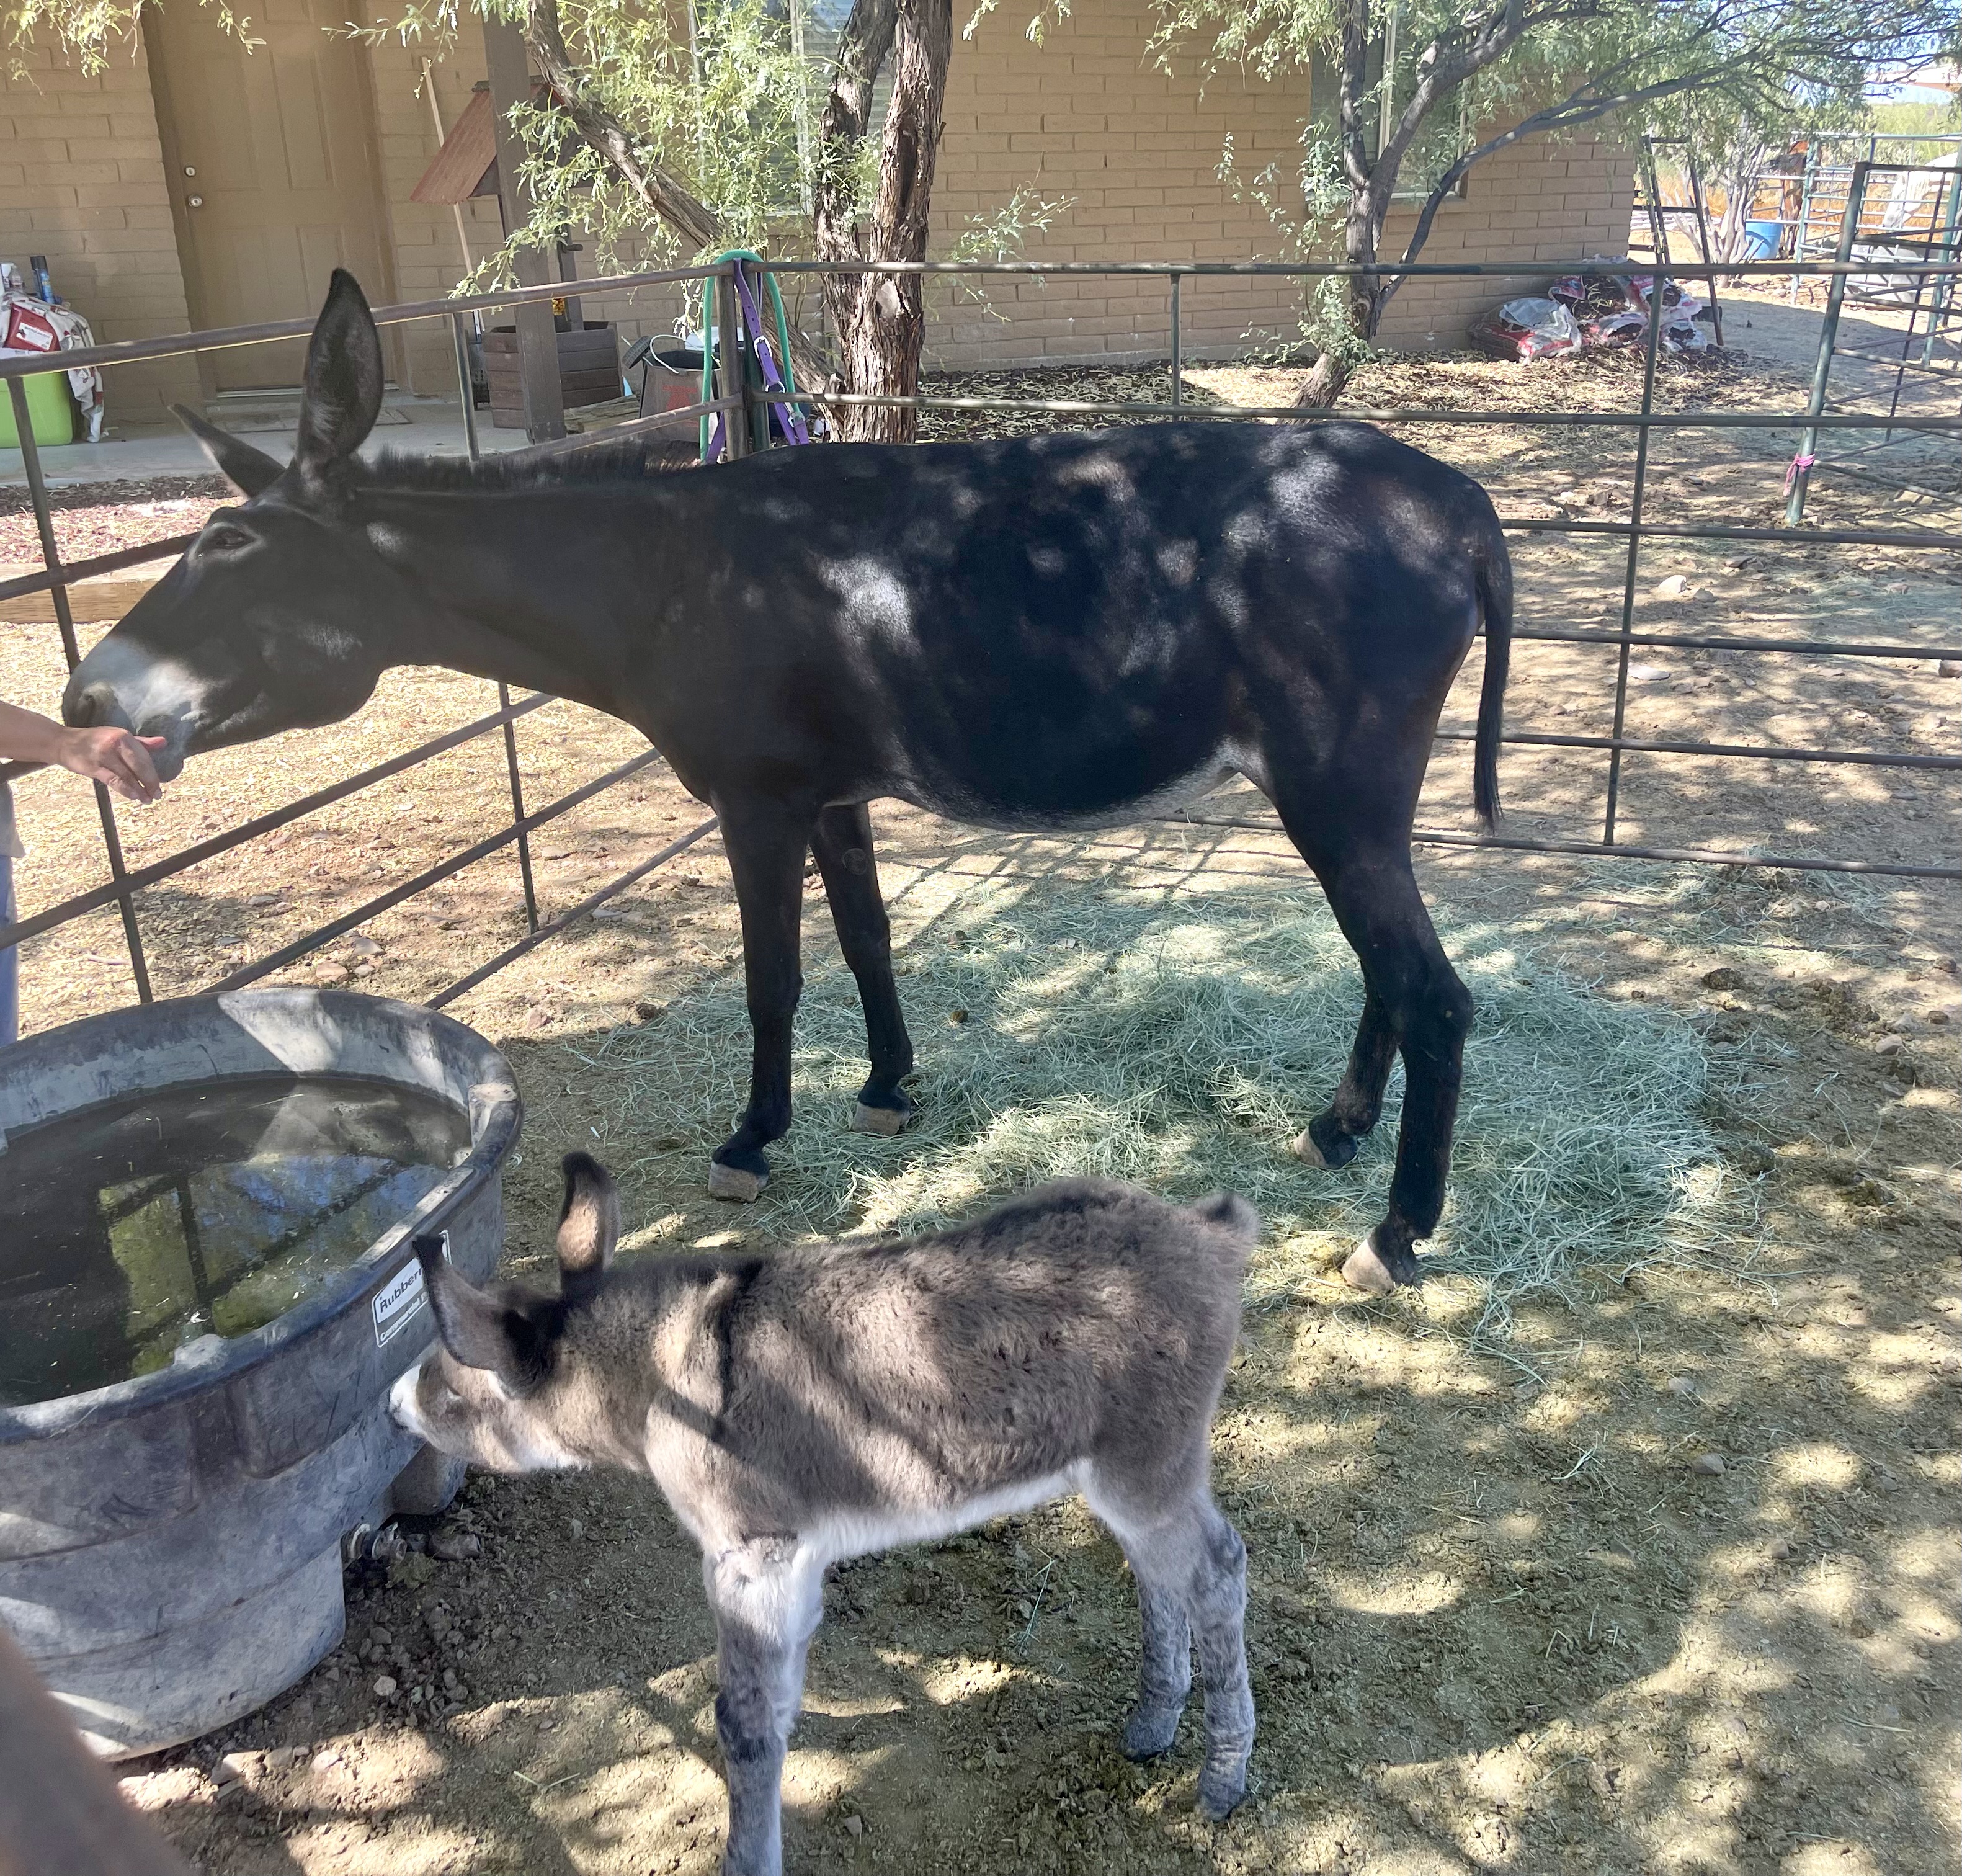 Baby burro "Roger" at the rescue